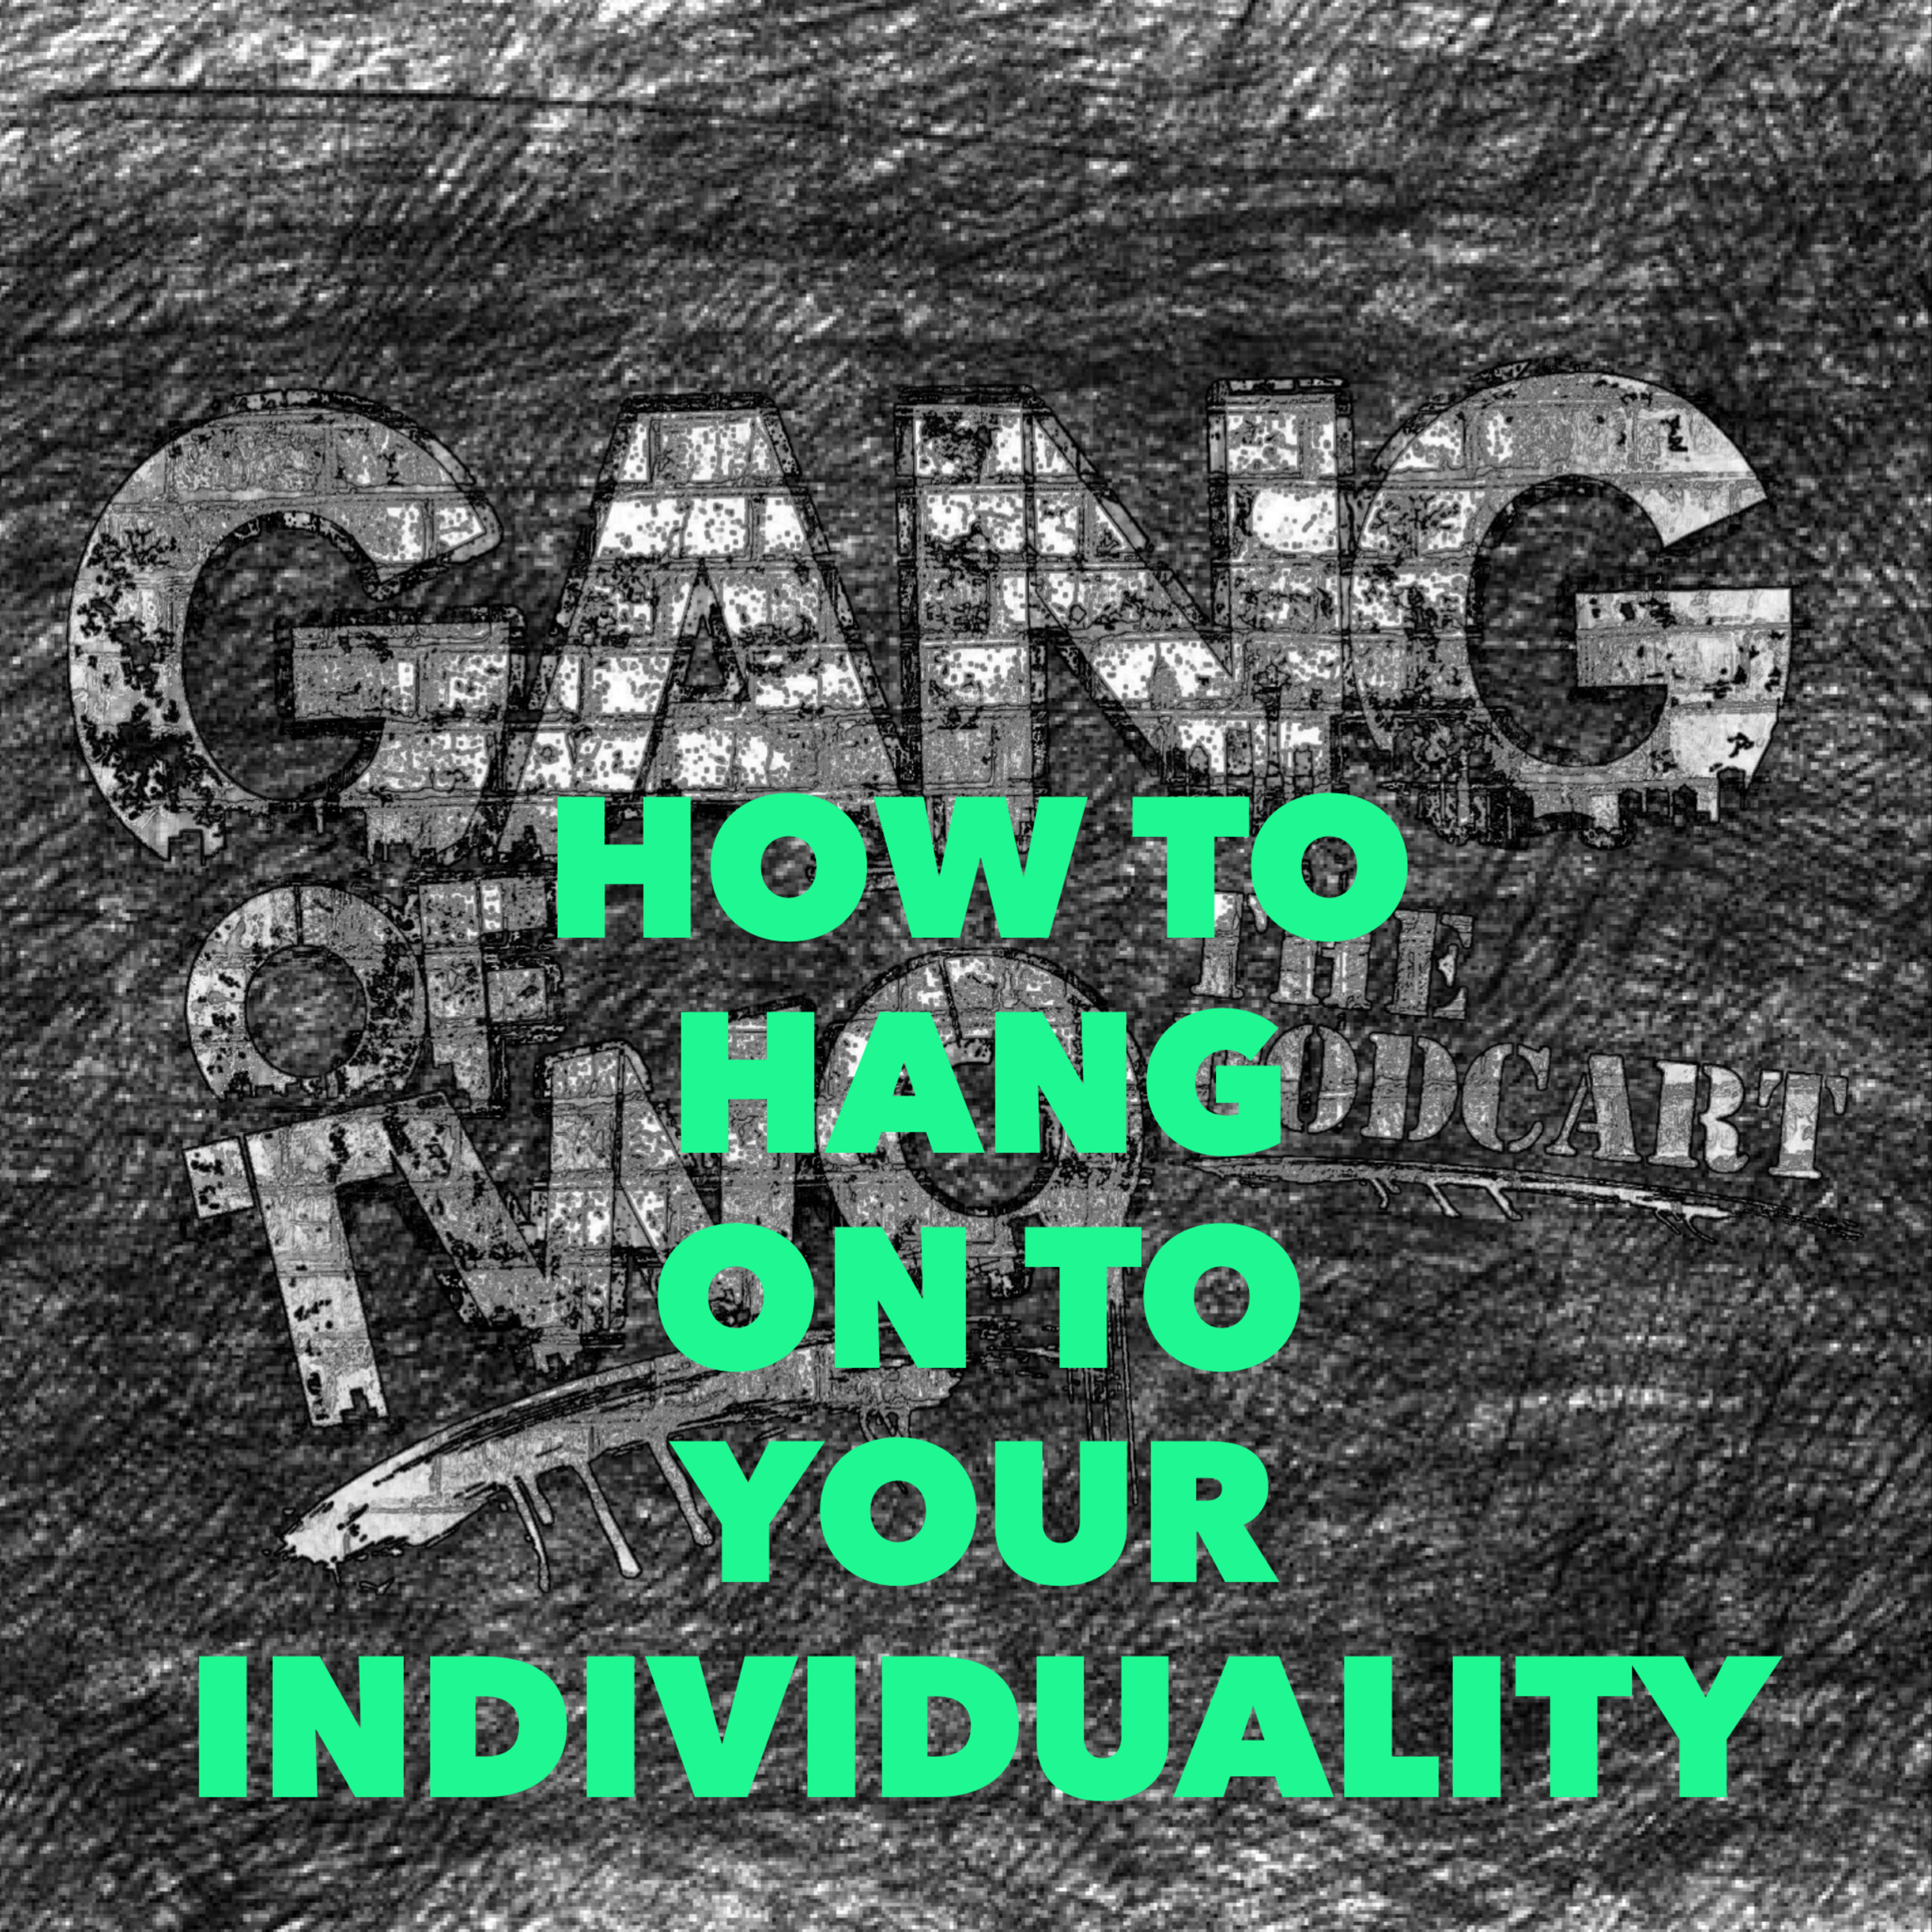 HOW TO MAINTAIN YOUR INDIVIDUALITY IN YOUR RELATIONSHIP Image